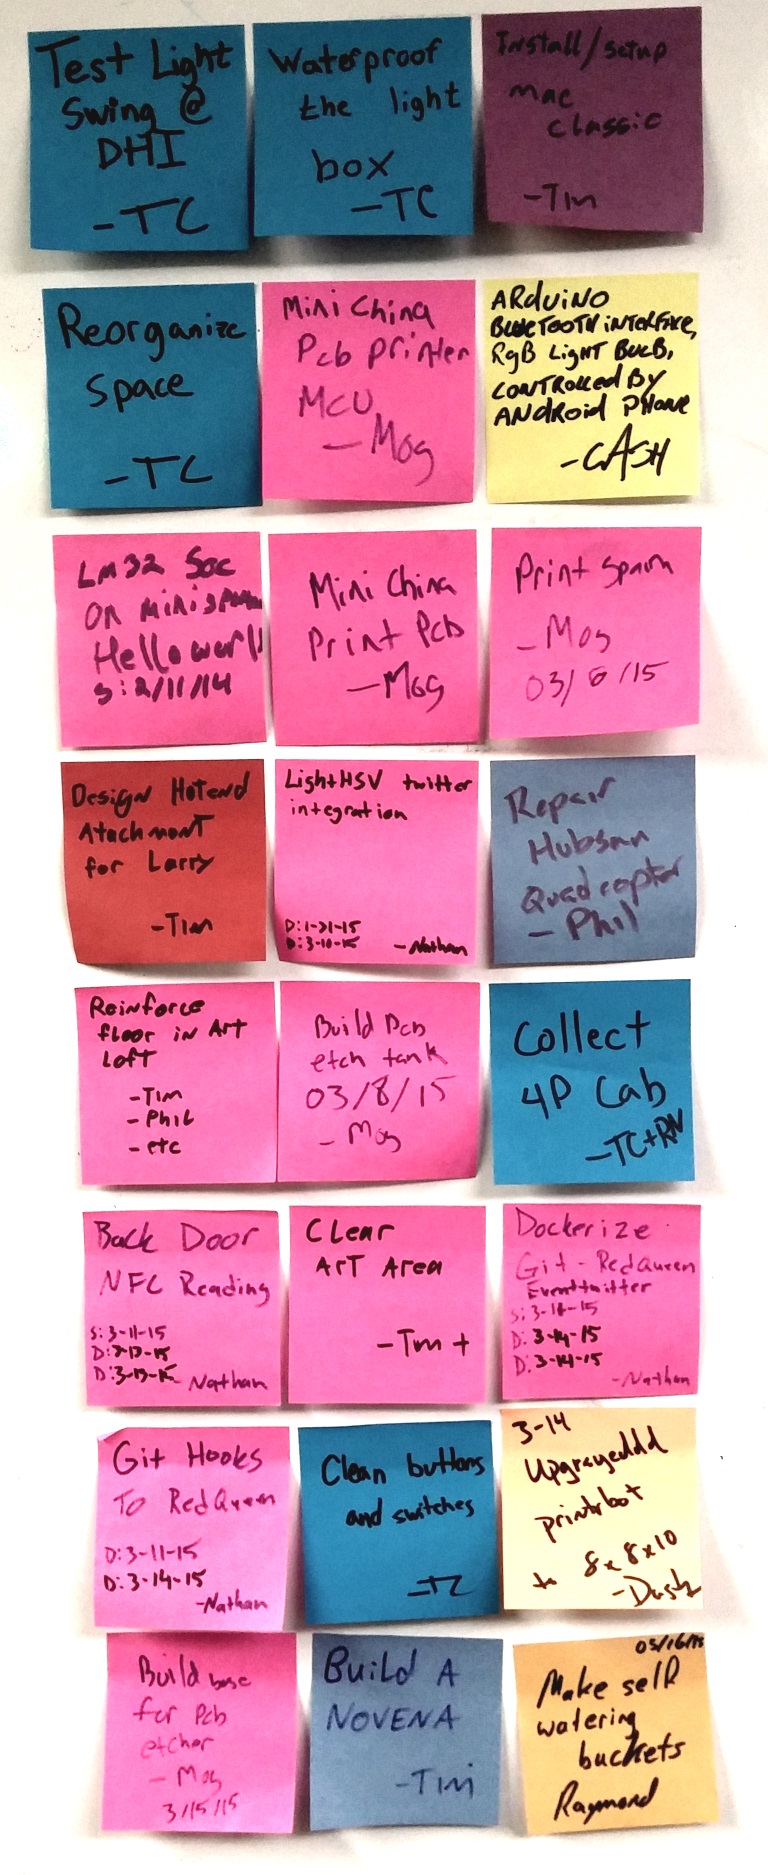 Cleared stickies from the Done column of the Kanban Board.